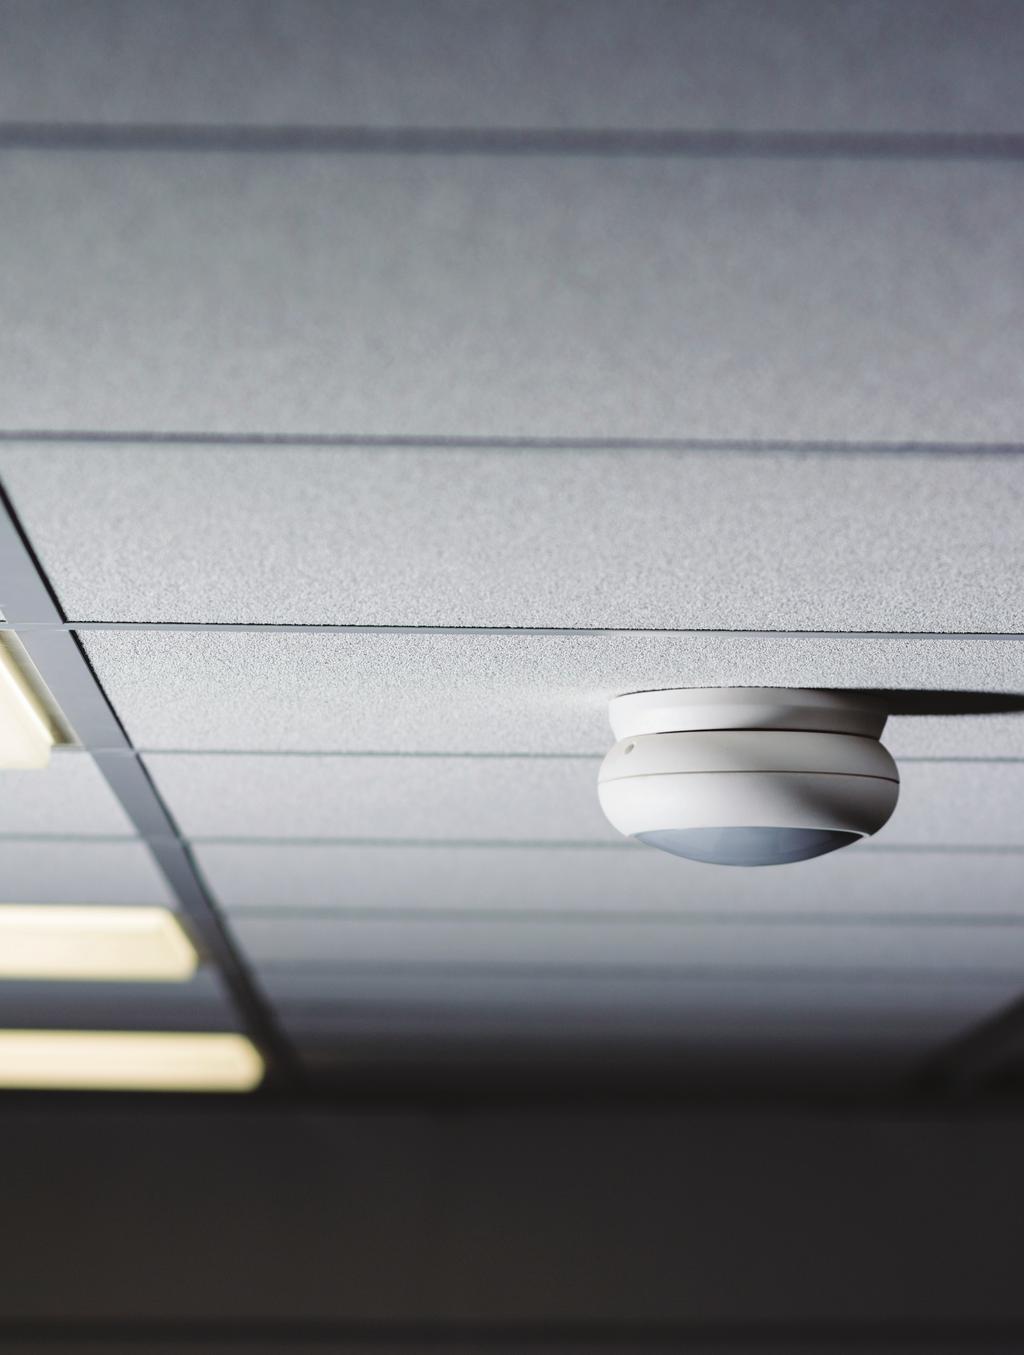 Occupancy and vacancy sensors can cut wasted electricity